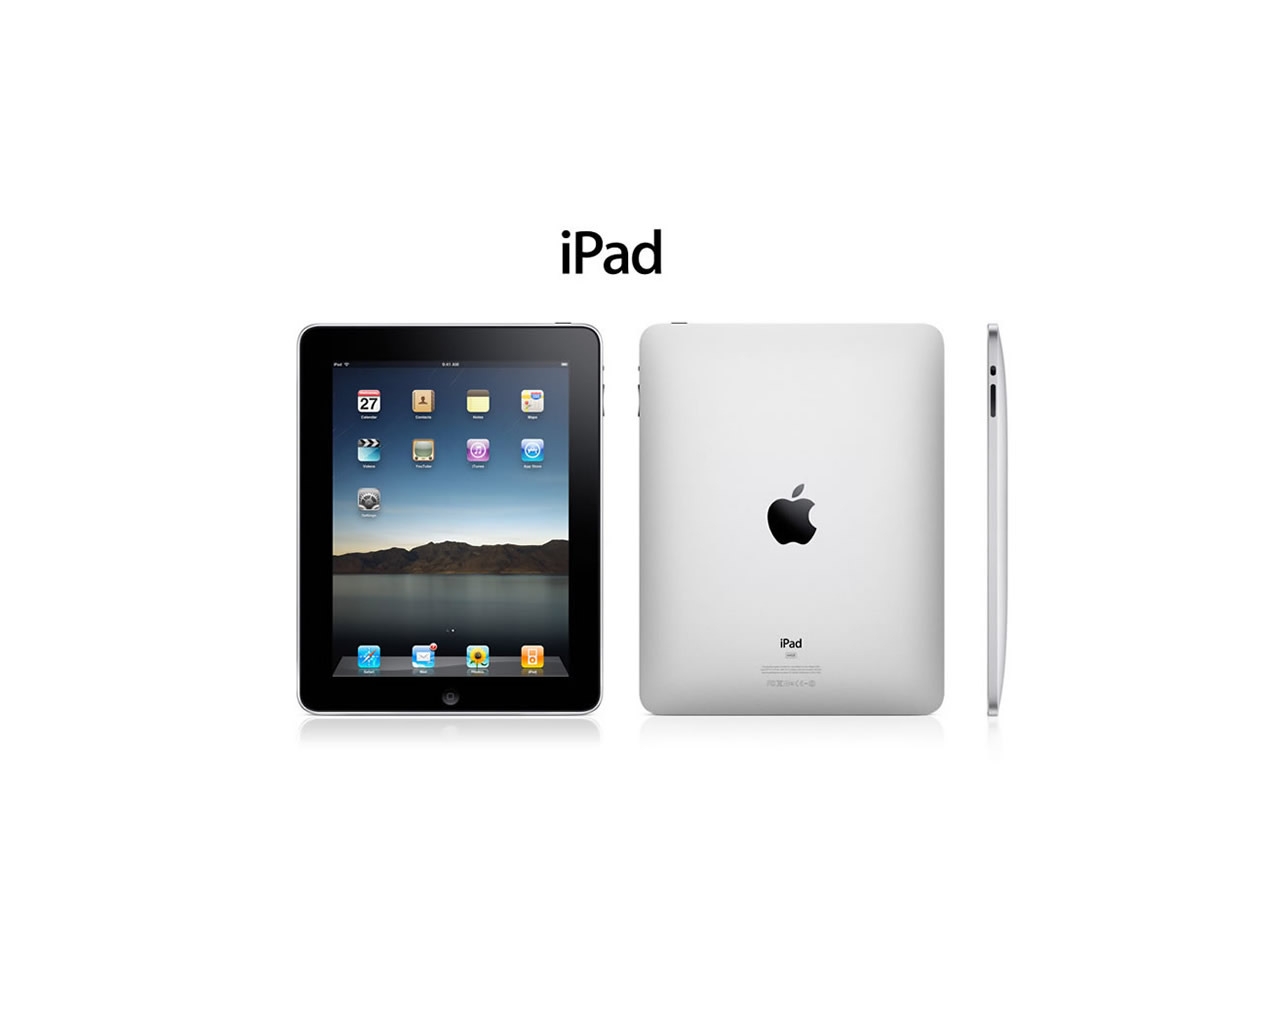 The New Apple iPad for 1280 x 1024 resolution